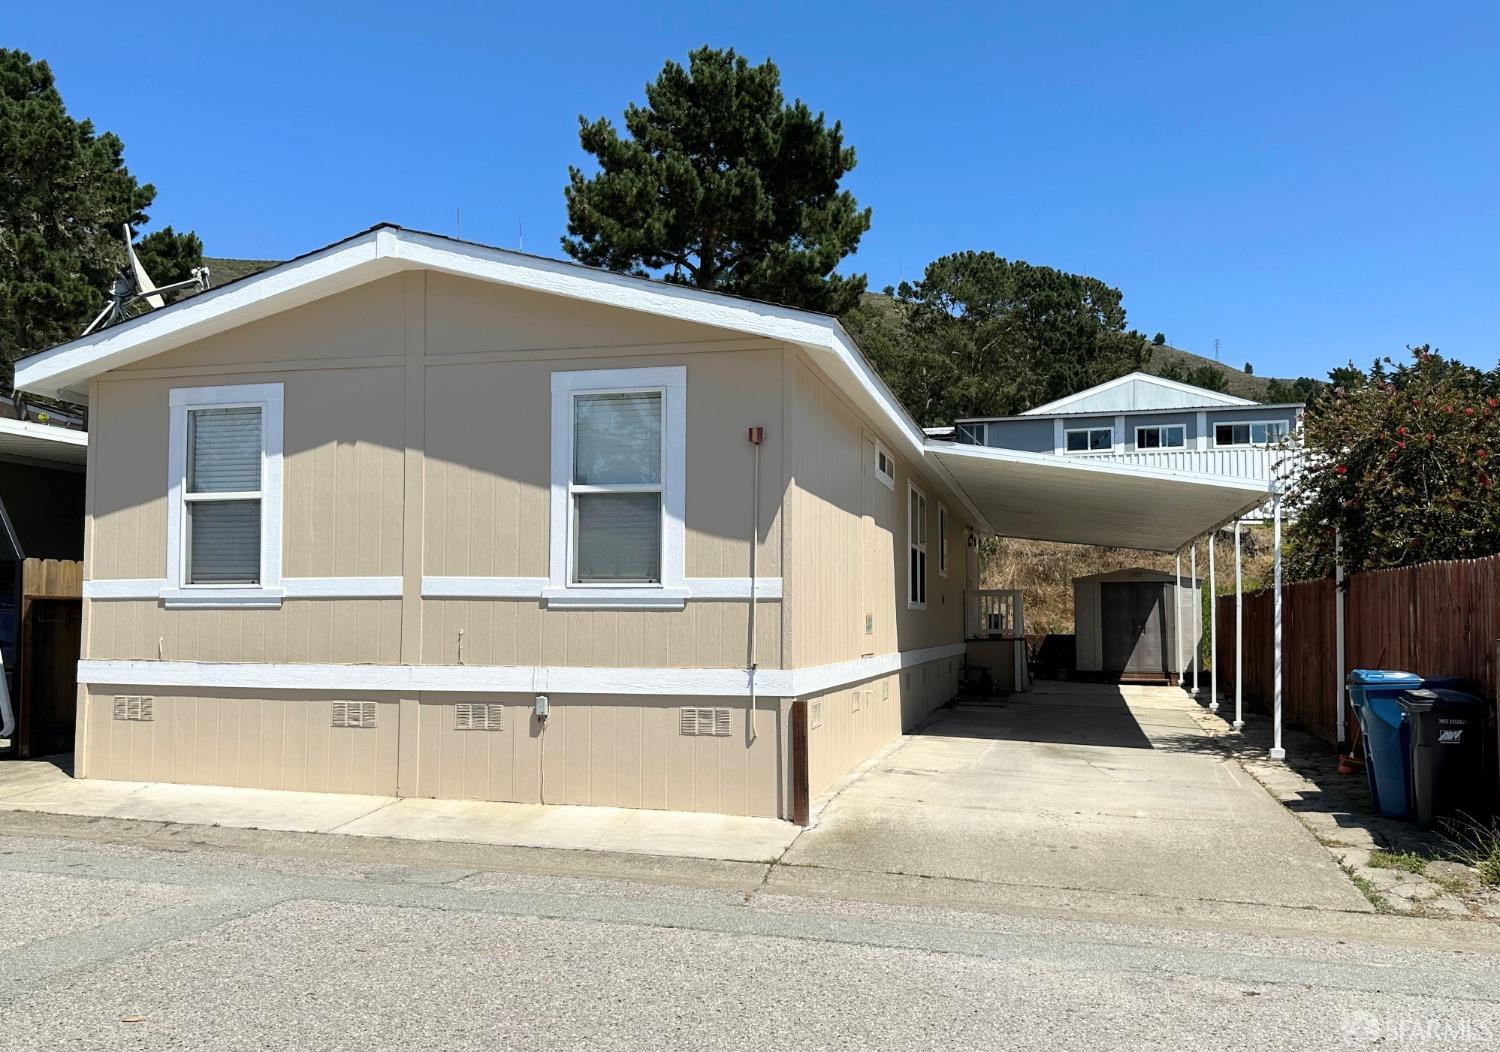 Welcome to Daly City's desirable gated family community. The Franciscan Park. This bright and spacious manufactured home consist of 3 bedrooms, 2 baths plus an office. Open kitchen, granite counter tops, newer appliances, large dinning room/ living room area with High ceiling and skylights, Auto Sprinkler system through out the house.2 car spaces carport and a storage shed. 4 months new roof and new exterior paint. Home had remodeled 6 years ago. Space rent $1,467.00  Enjoy the multiple amenities that the Franciscan park has to offer: Clubhouse, swimming pool, exercise facilities, card/billboard room, BBQ area, Security guard at entrance and many more. Convenient location, near schools, transportation and Colma BART station.